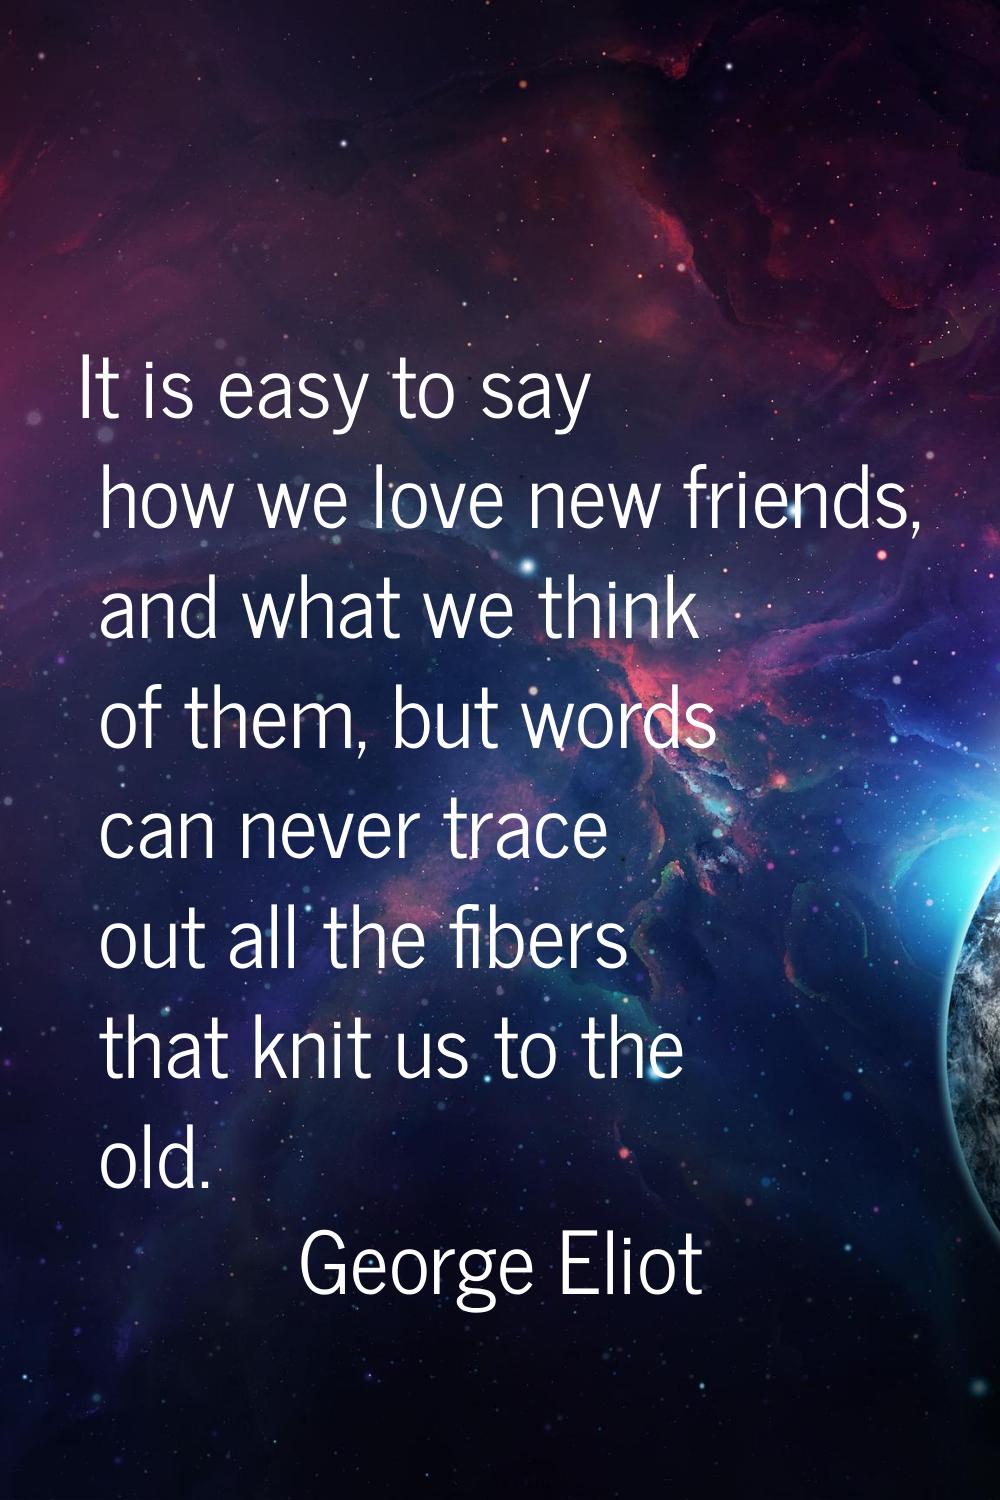 It is easy to say how we love new friends, and what we think of them, but words can never trace out